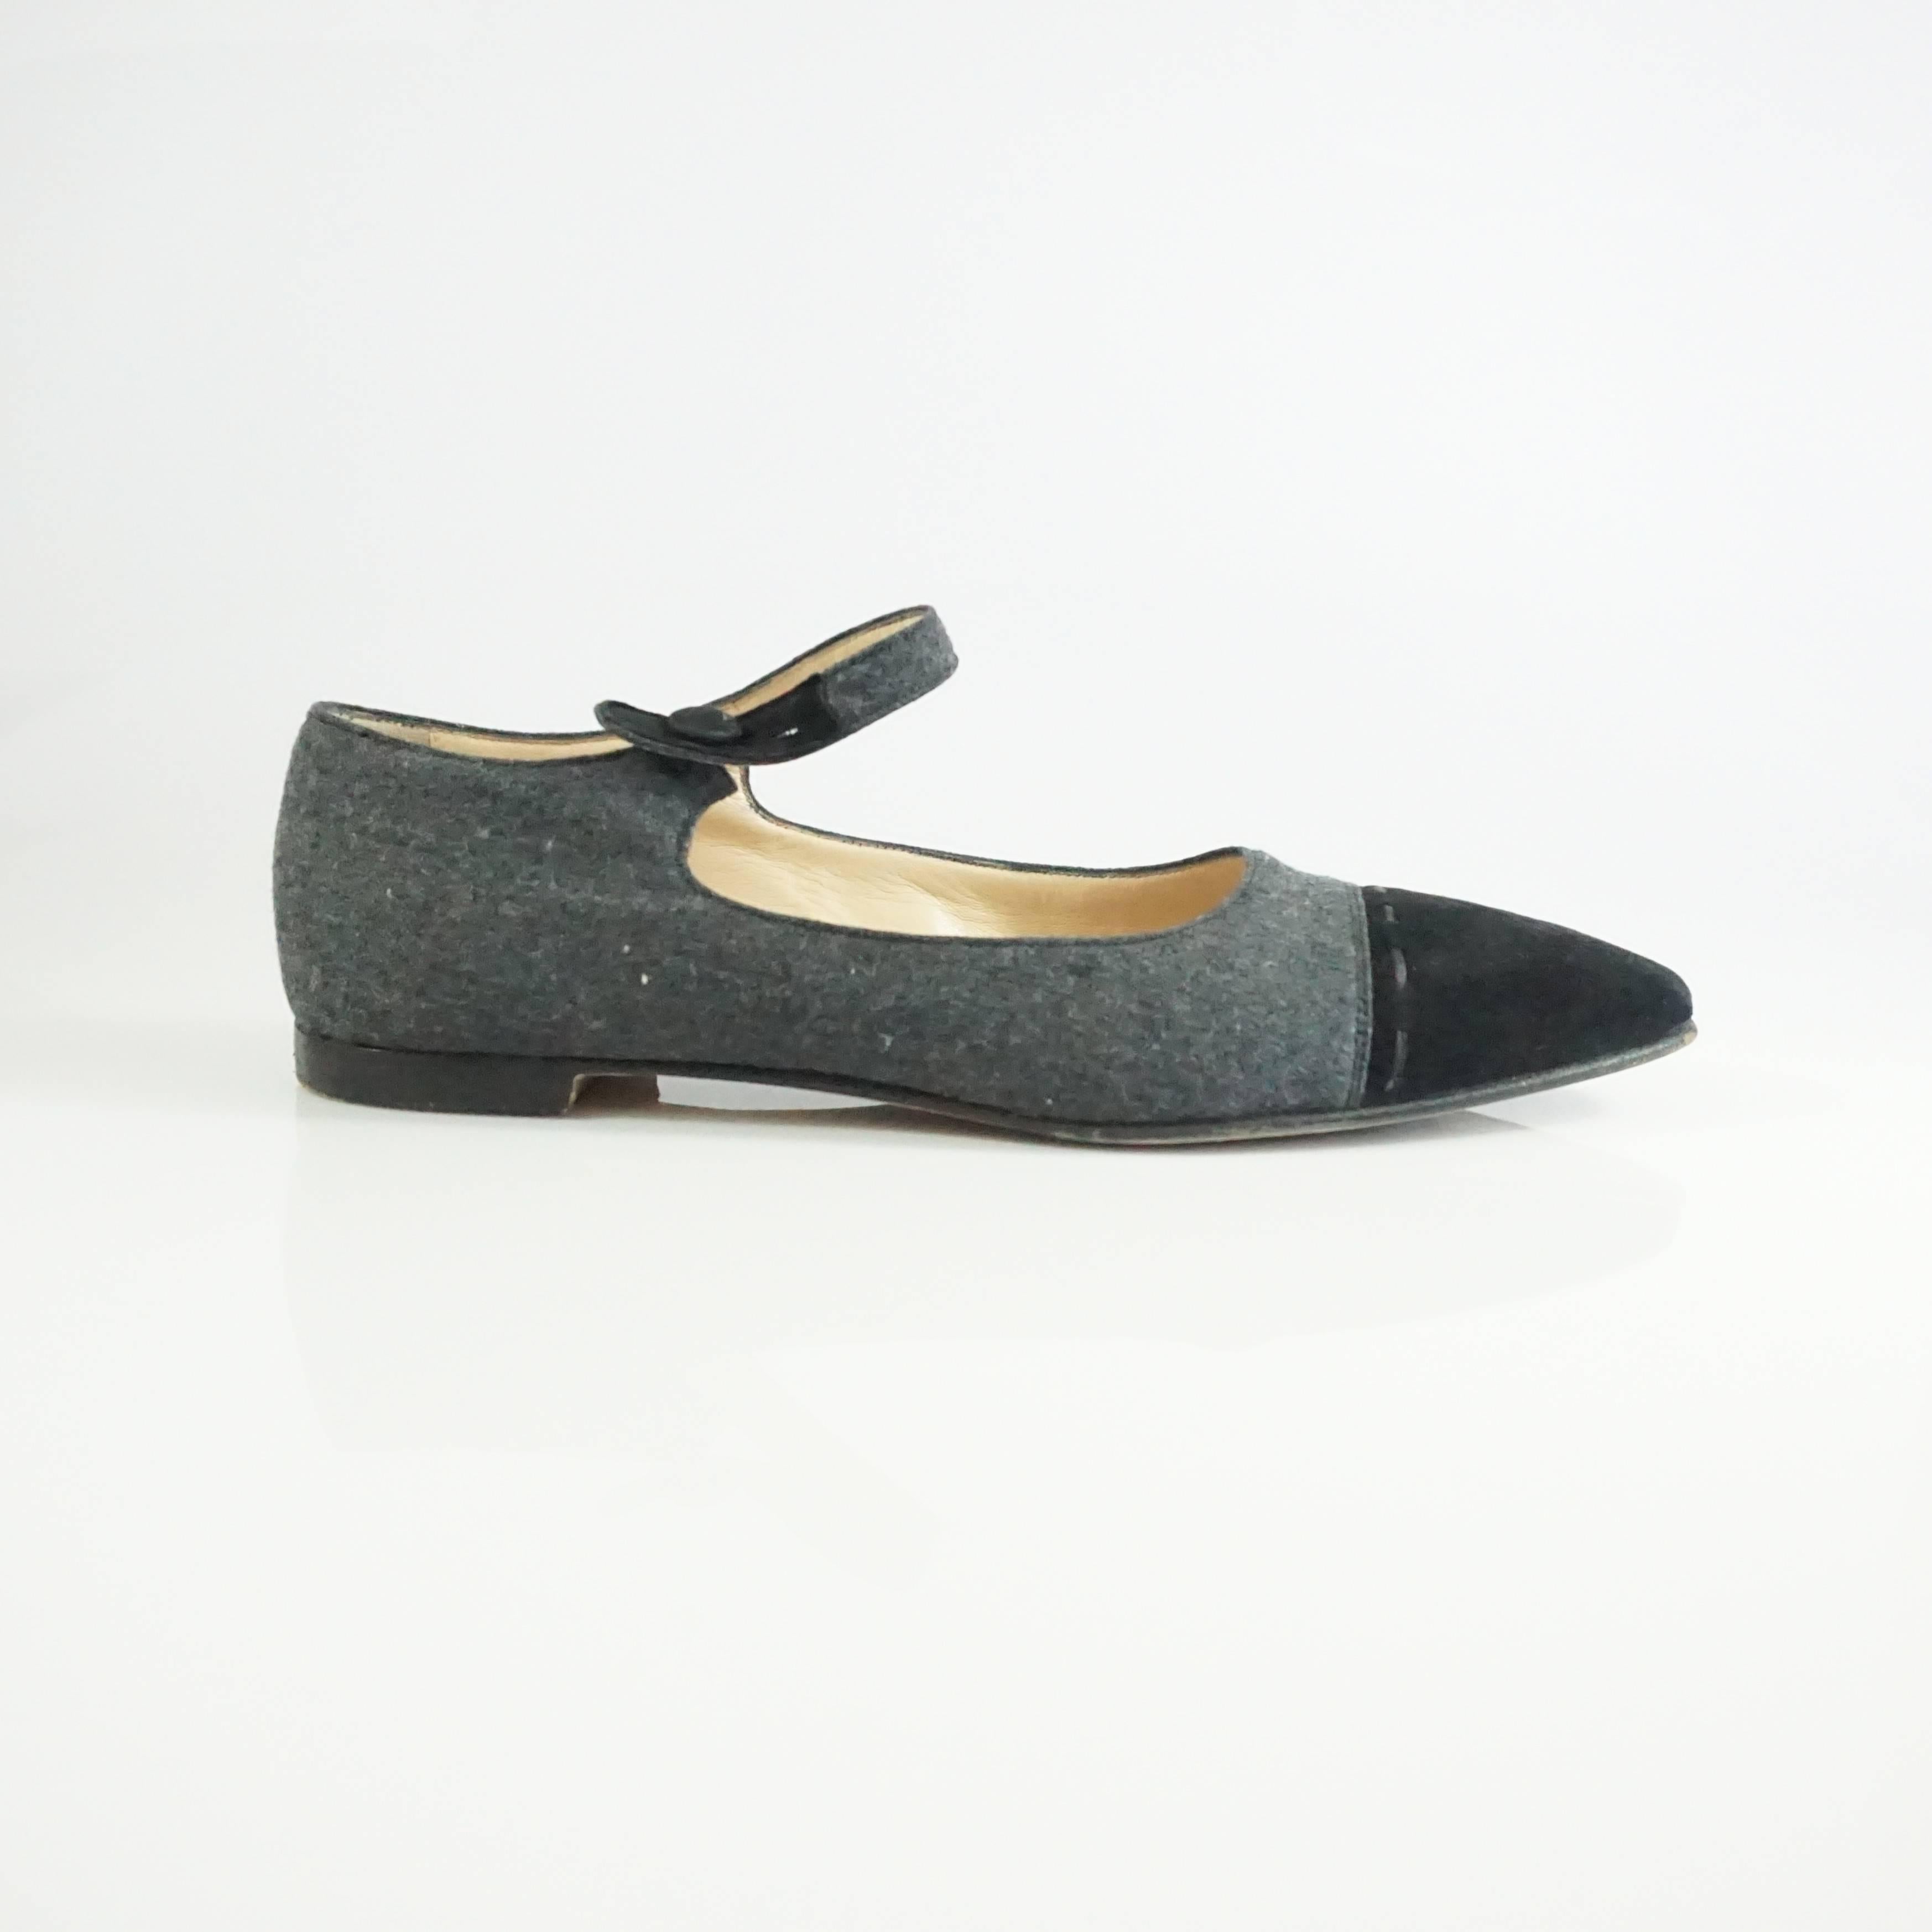 Manolo Blahnik Grey Wool and Black Suede Mary Jane Style Shoes-37.5  These fabulous classic style shoes are made of grey wool and have a black toe box with black leather stitching and a black suede accents on the strap. These shoes are in excellent